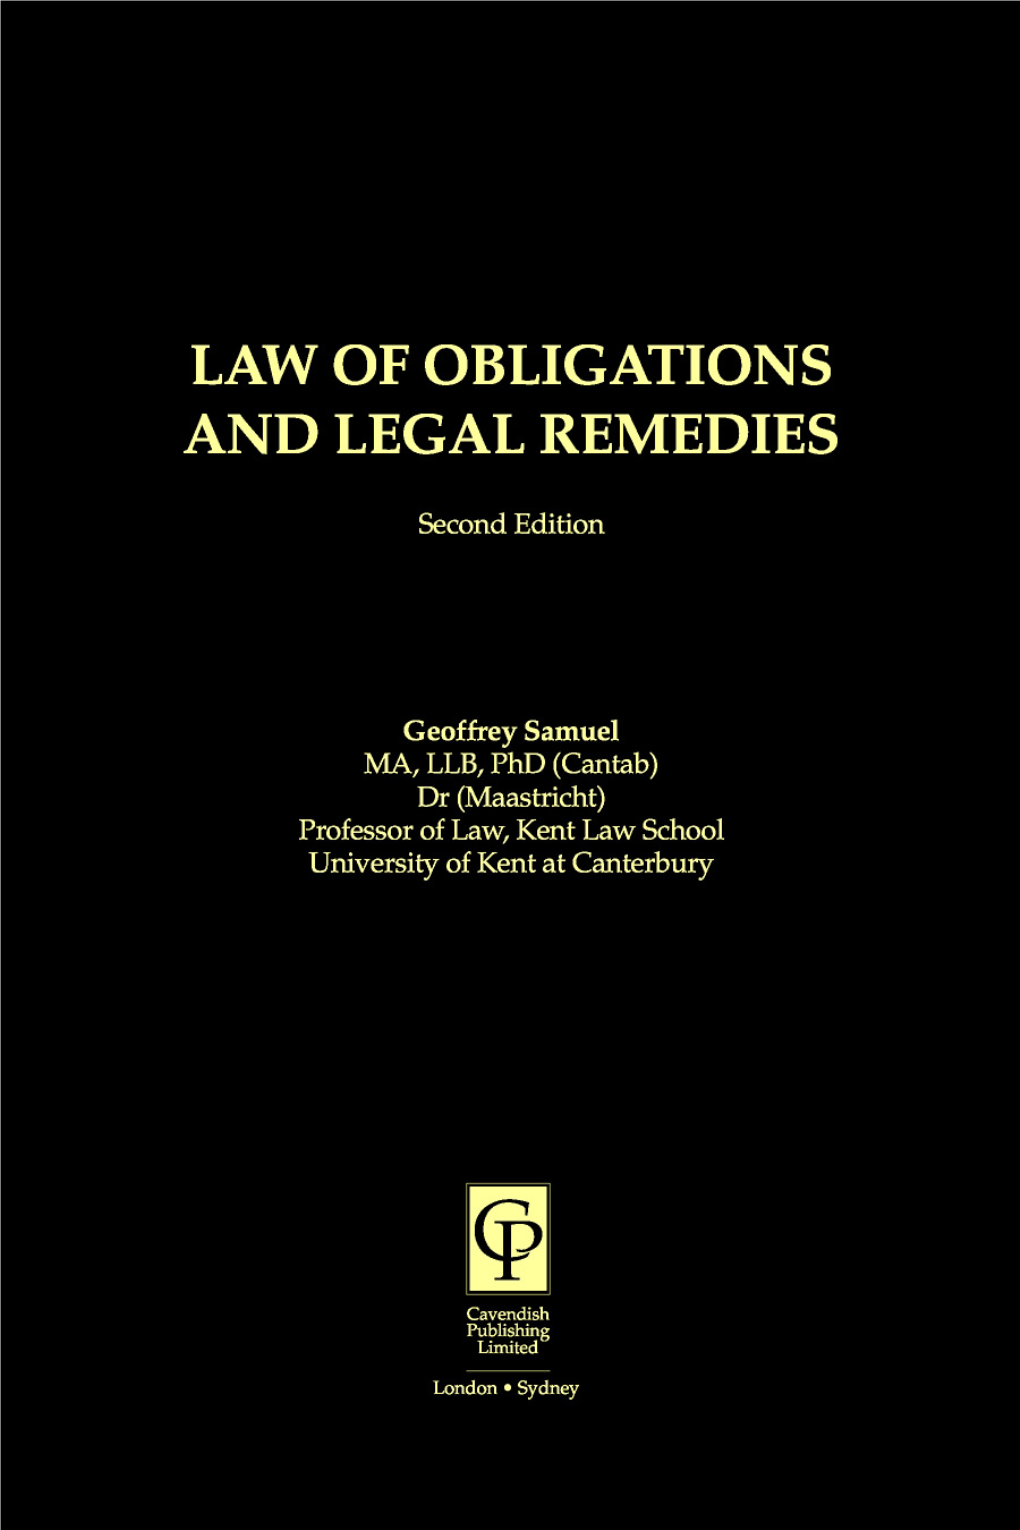 Law of Obligations and Legal Remedies, Second Edition